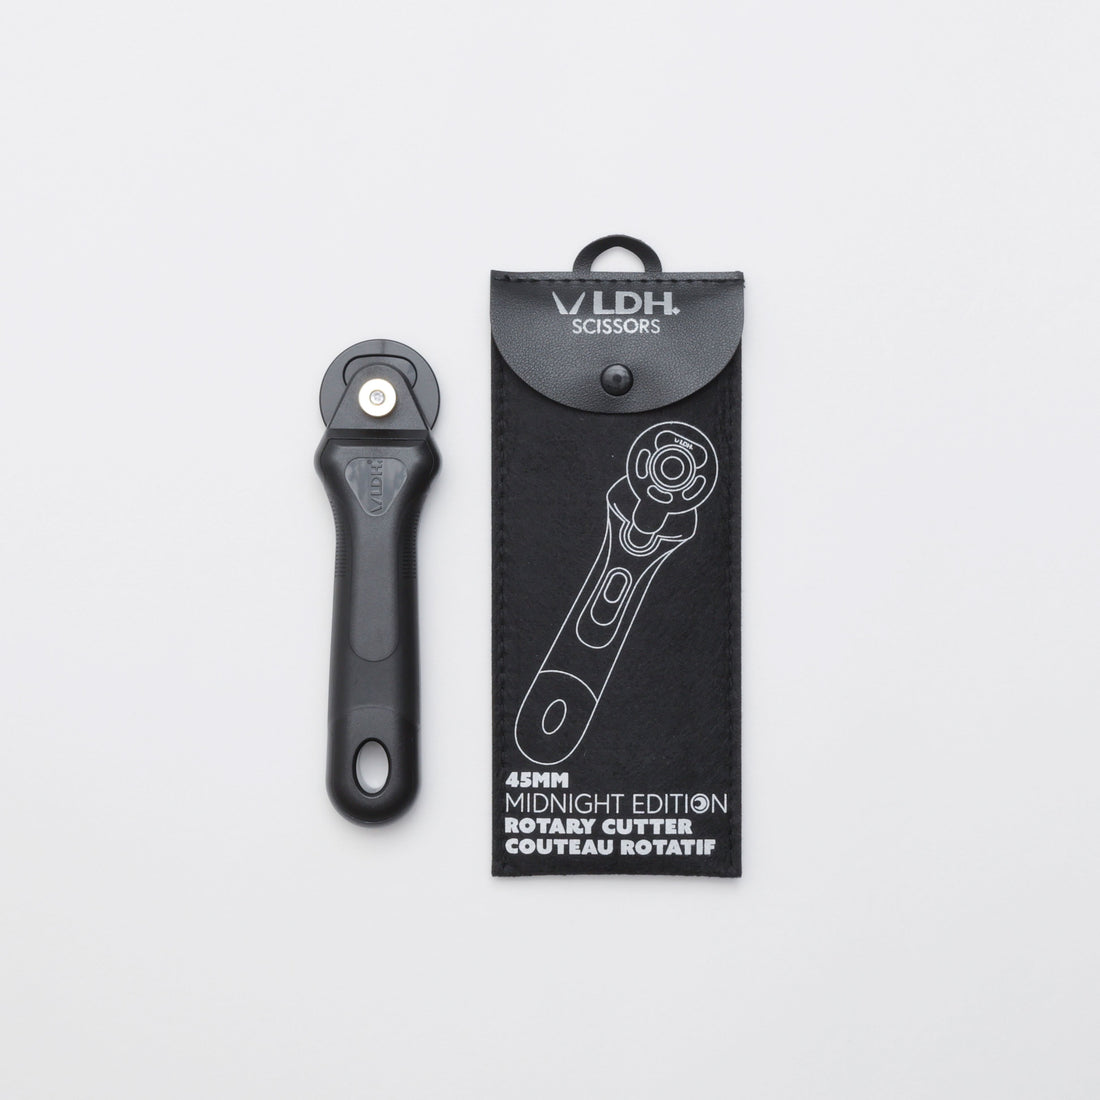 LDH - Rotary Cutter - Straight Handle - Midnight Edition